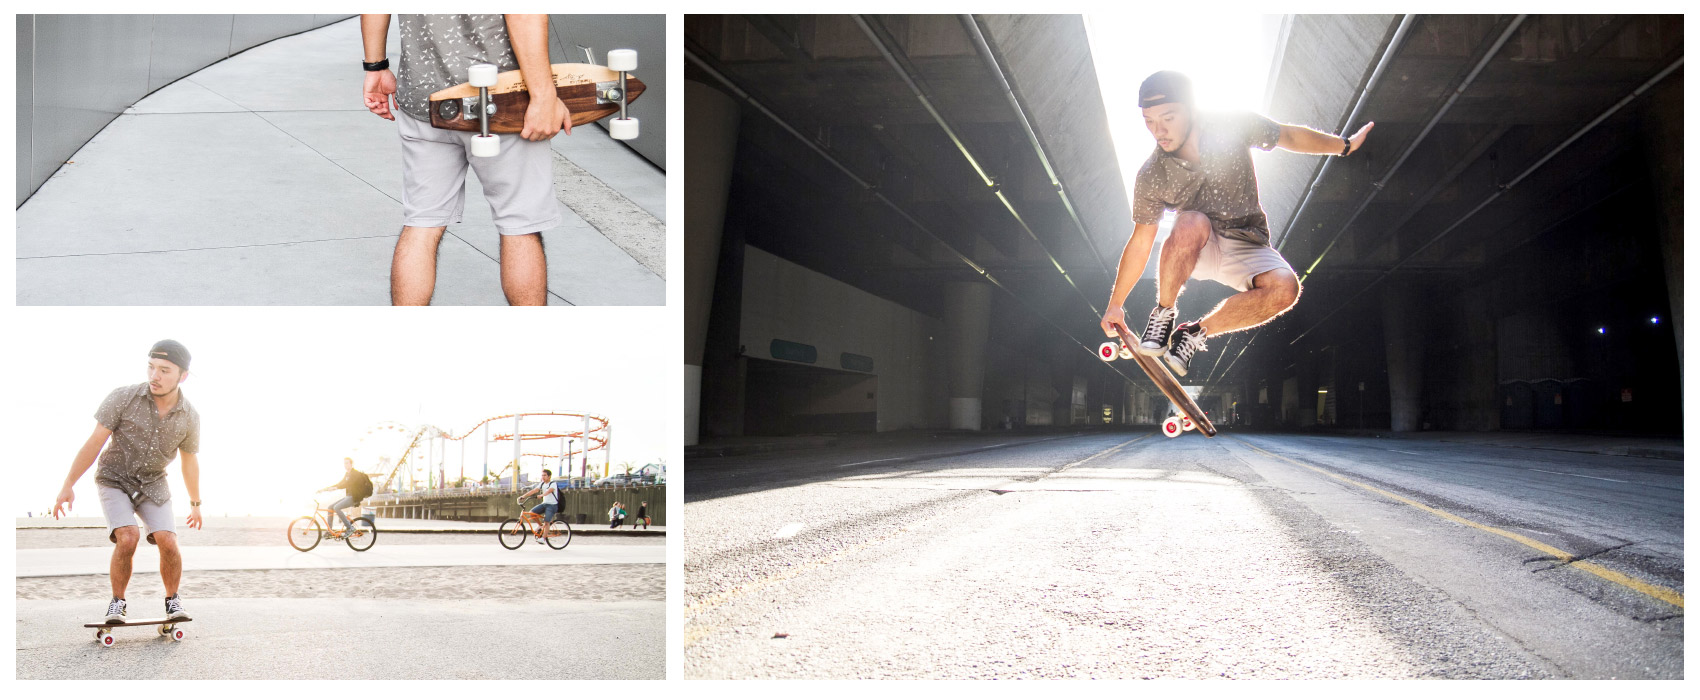 Photos of skateboards in action